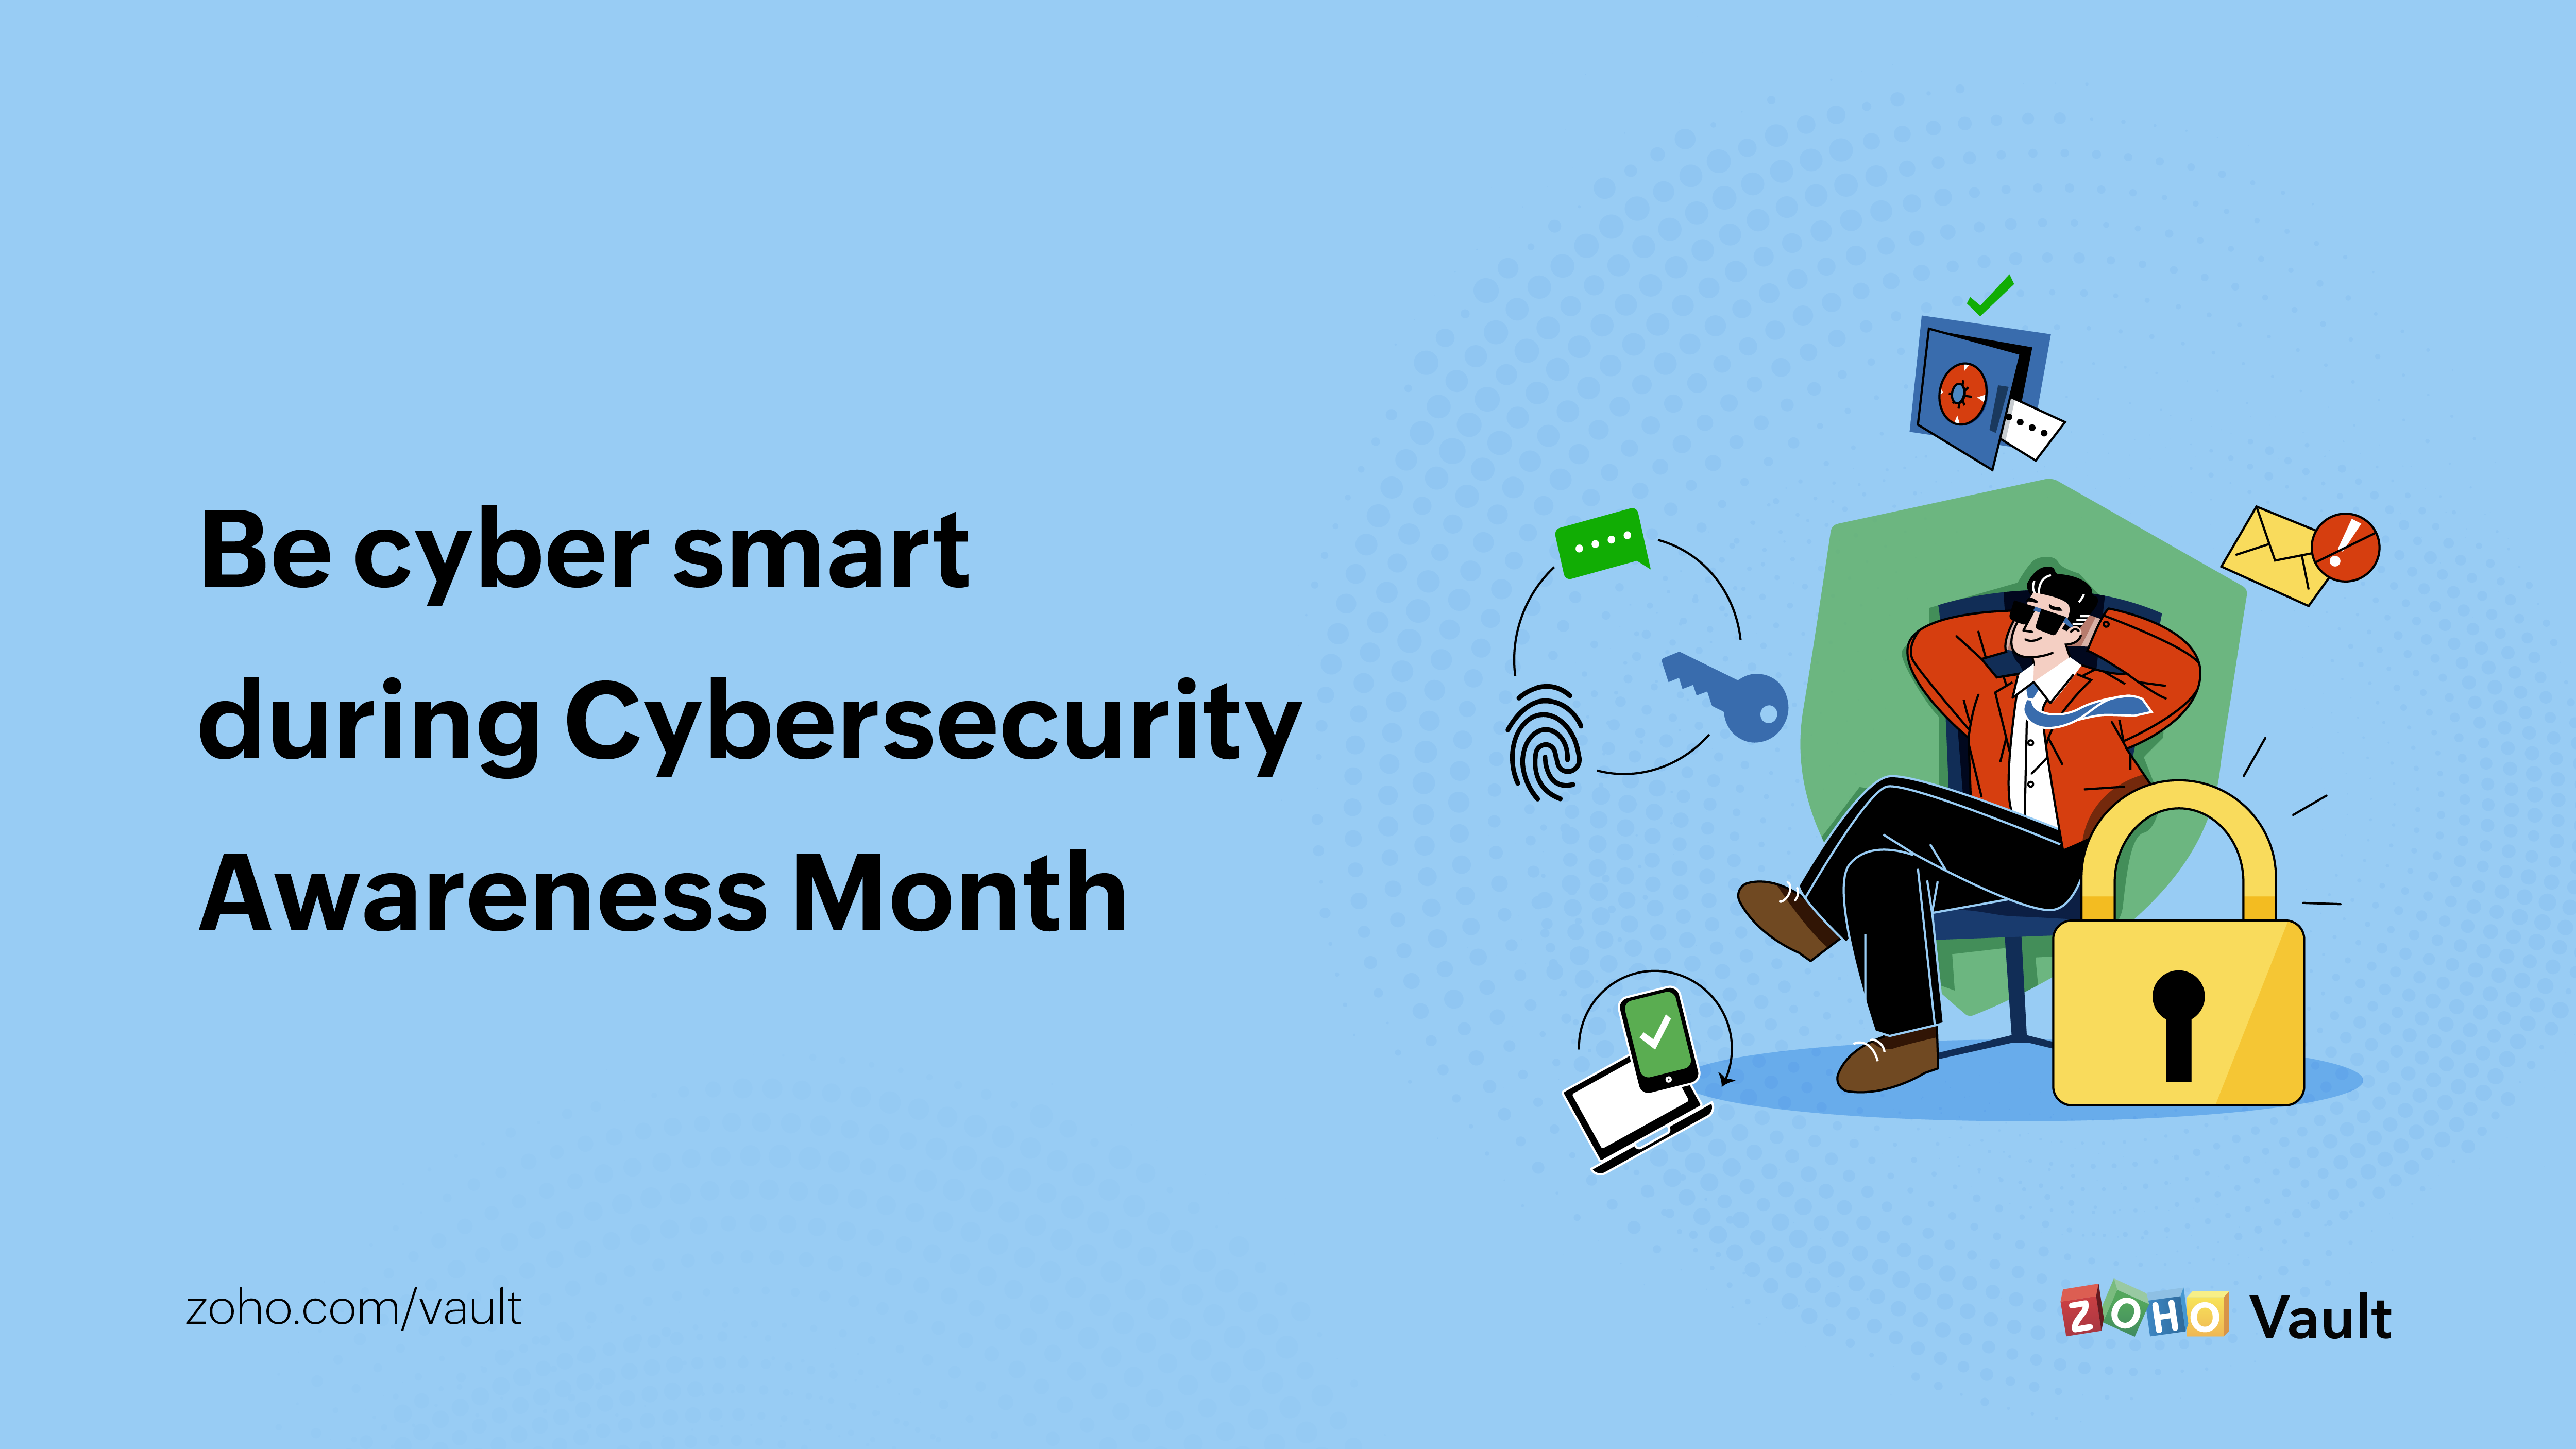 Zoho Vault Cybersecurity Month